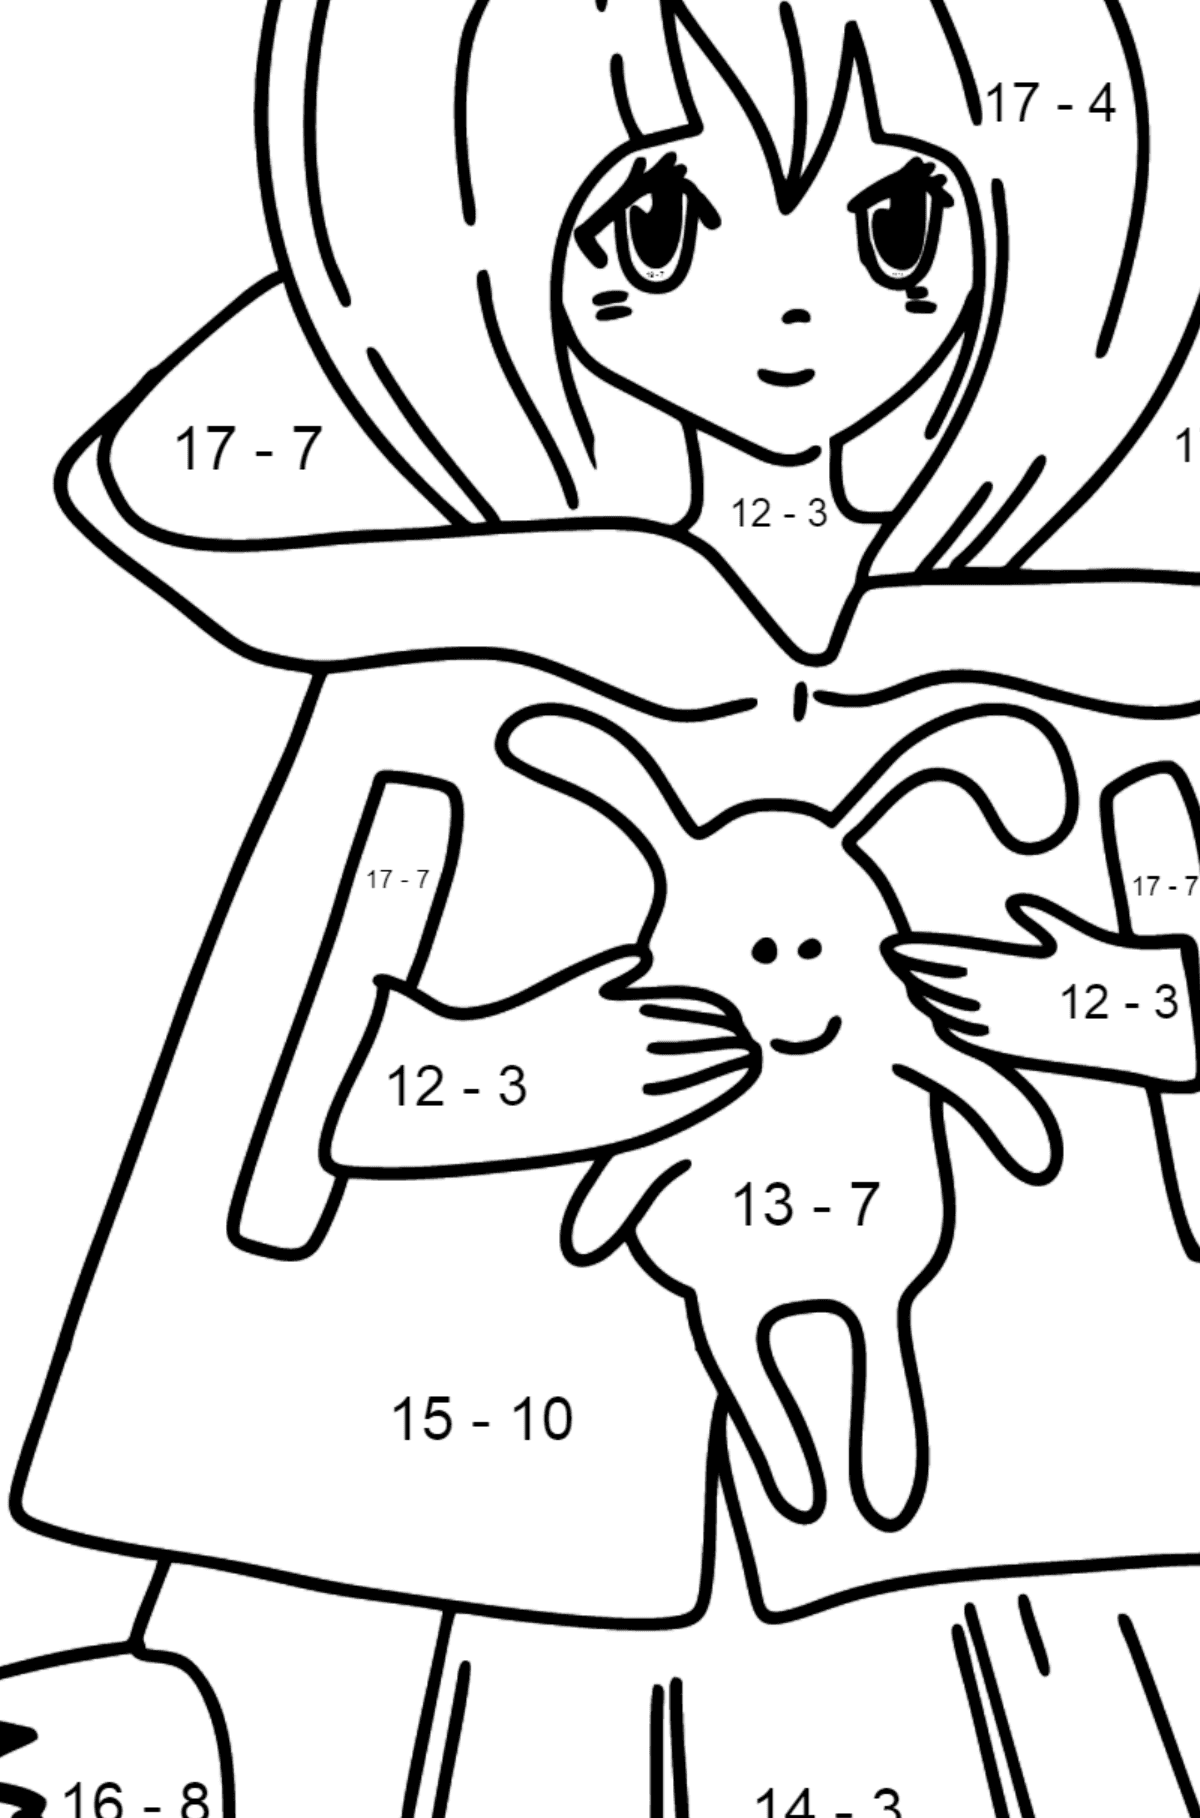 Anime Girl with Tail coloring page - Math Coloring - Subtraction for Kids